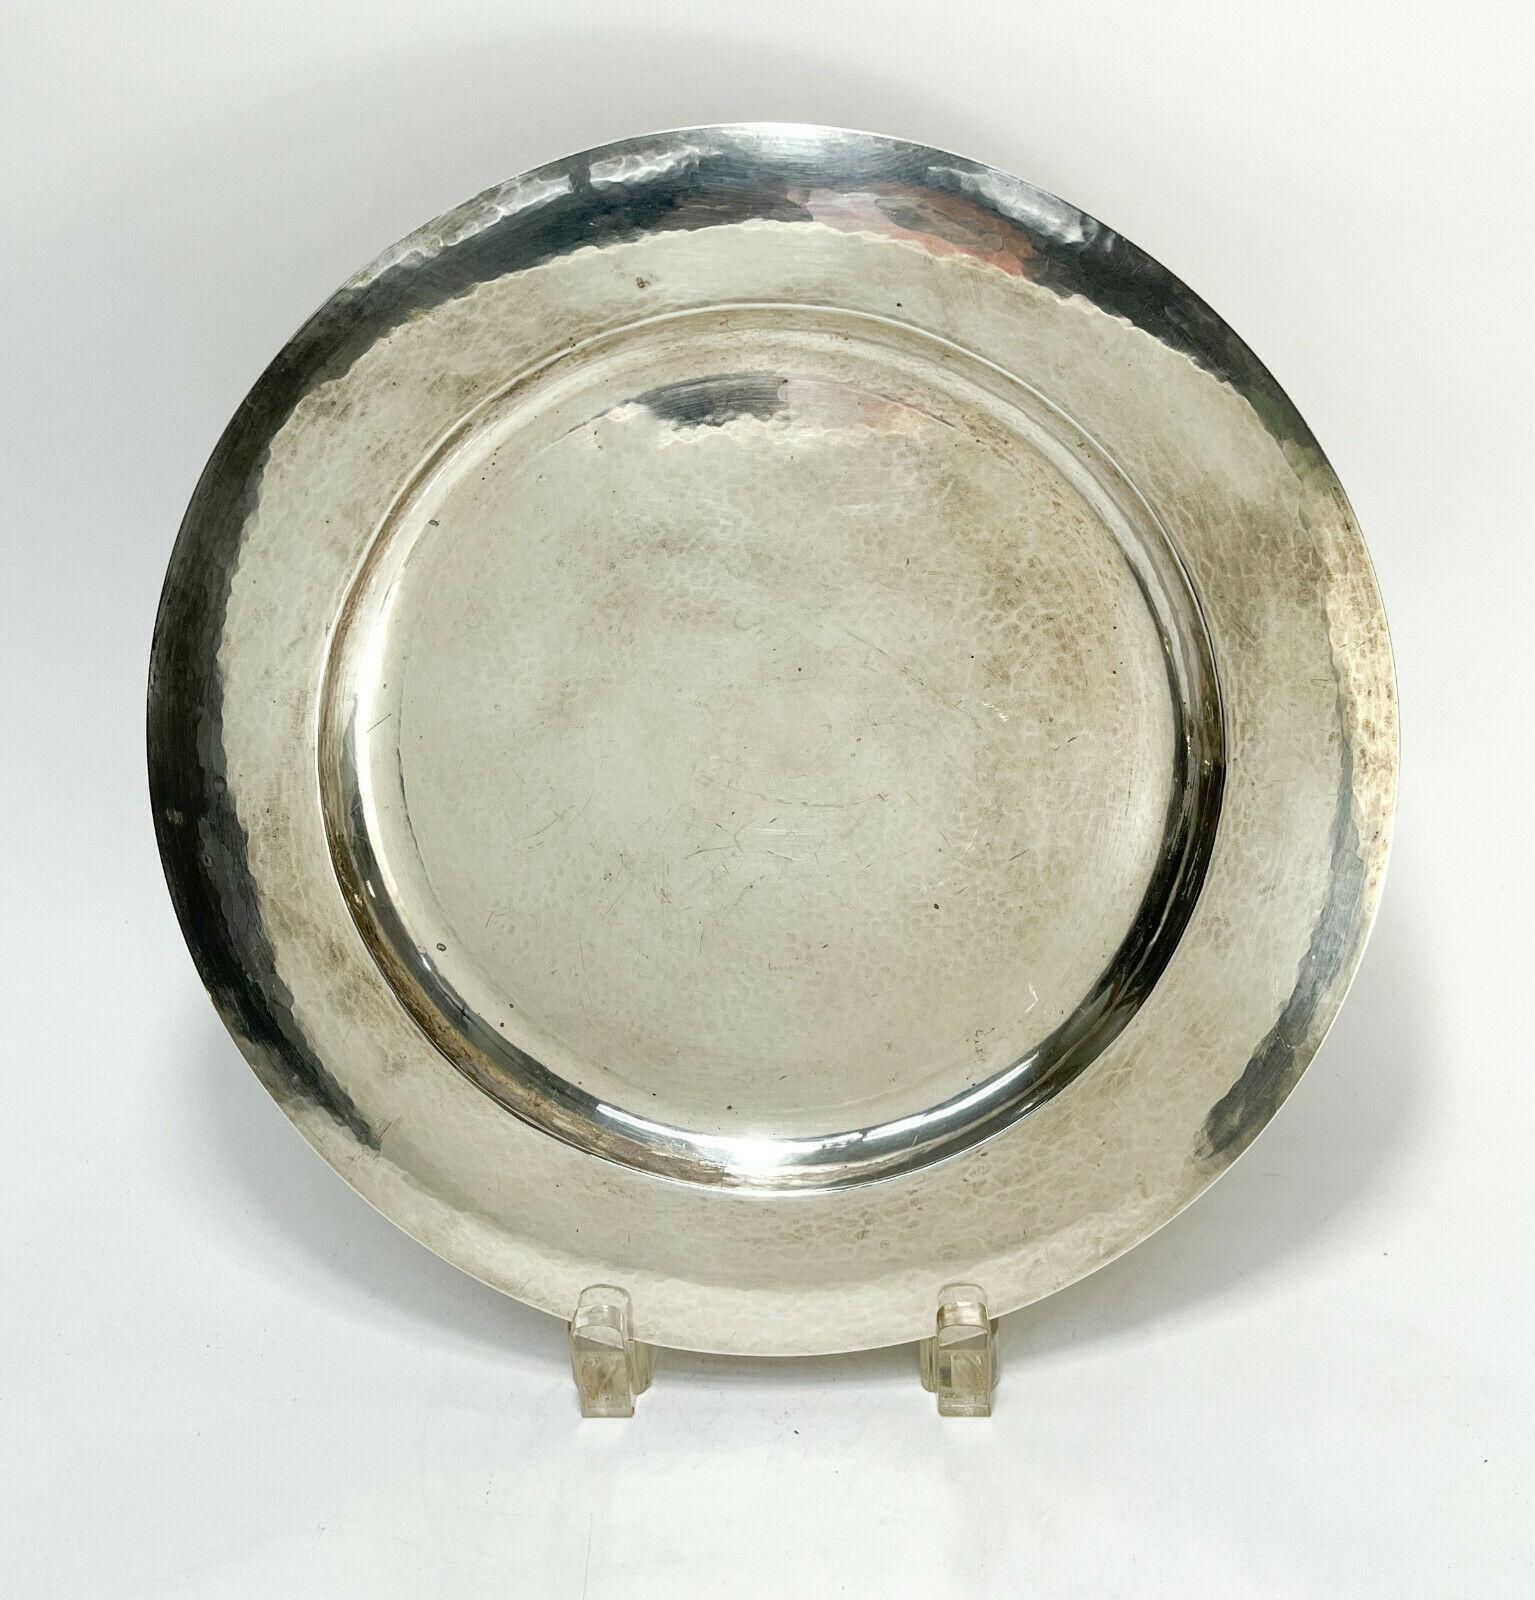 The Kalo Shop Sterling silver Hand wrought service plate

An indistinguishable inscription to the underside with date marks 1893-1923. The Kalo Sterling silver mark to the underside as well.

Additional Information:
Composition: Sterling Silver